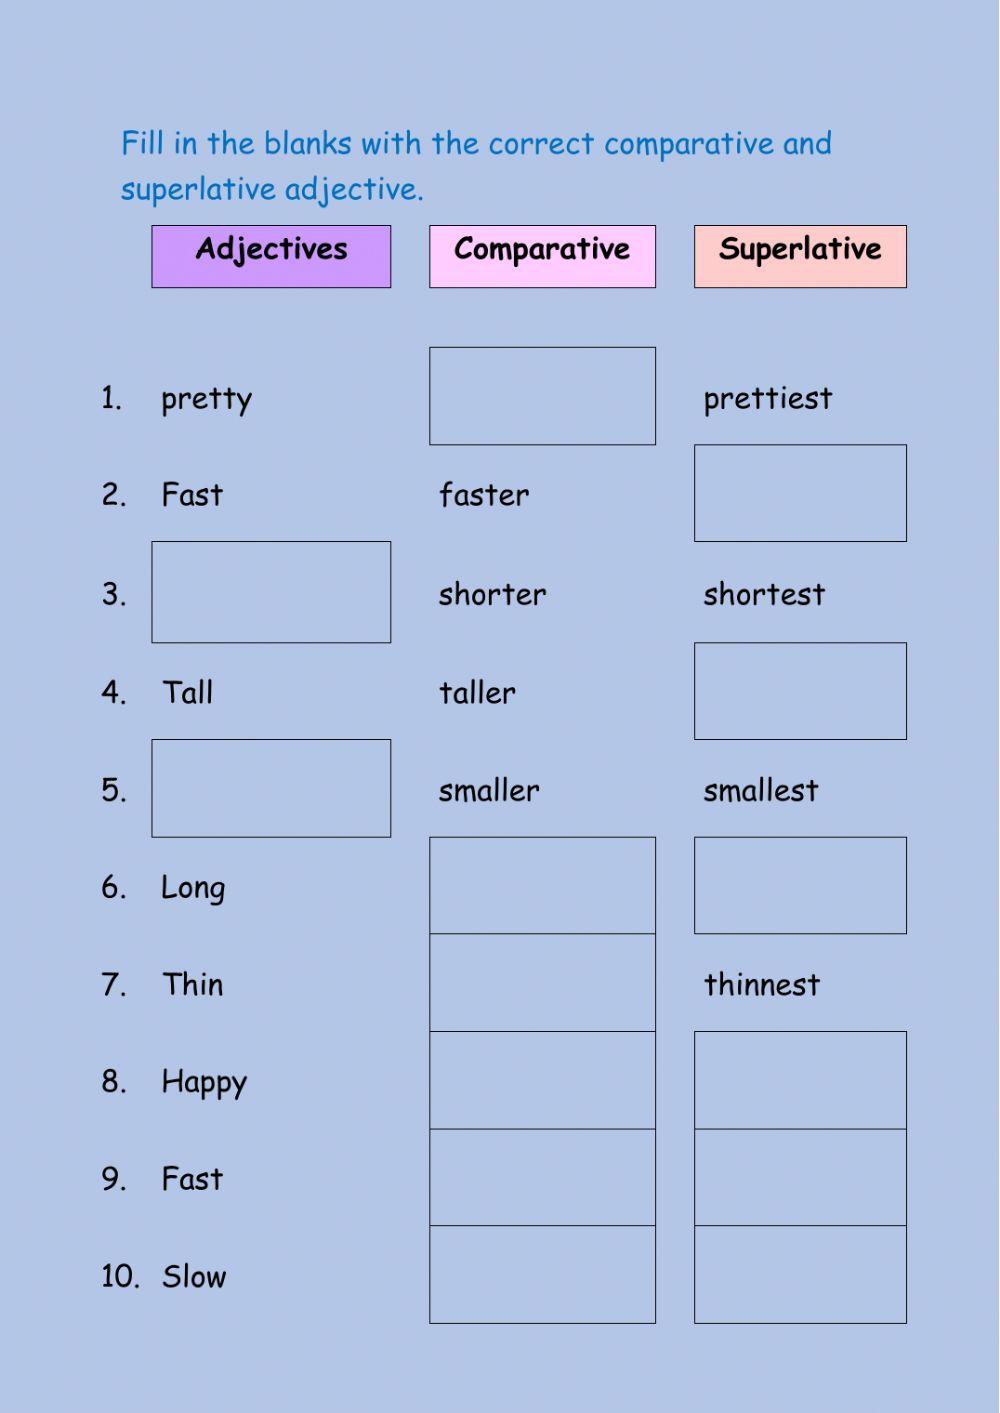 Comparative and Superlative form of the adjectives